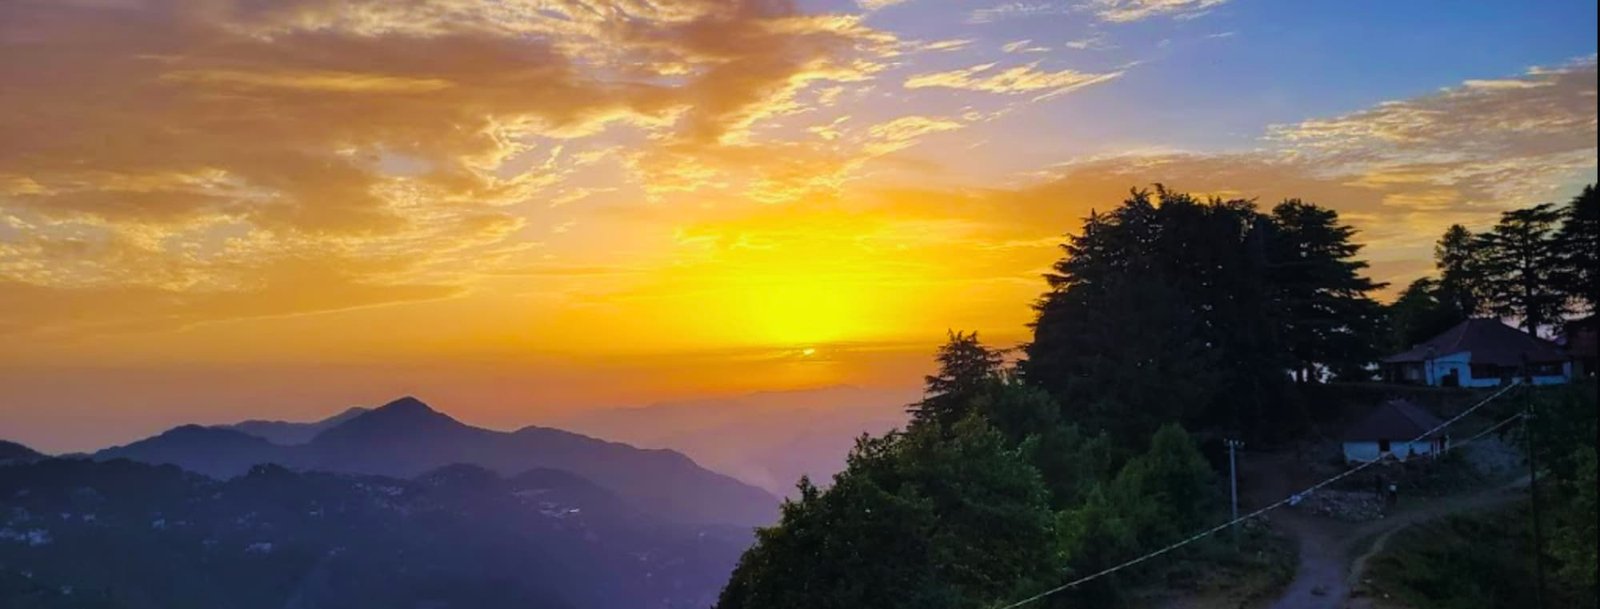 Lal Tibba, best tourist places in Mussoorie